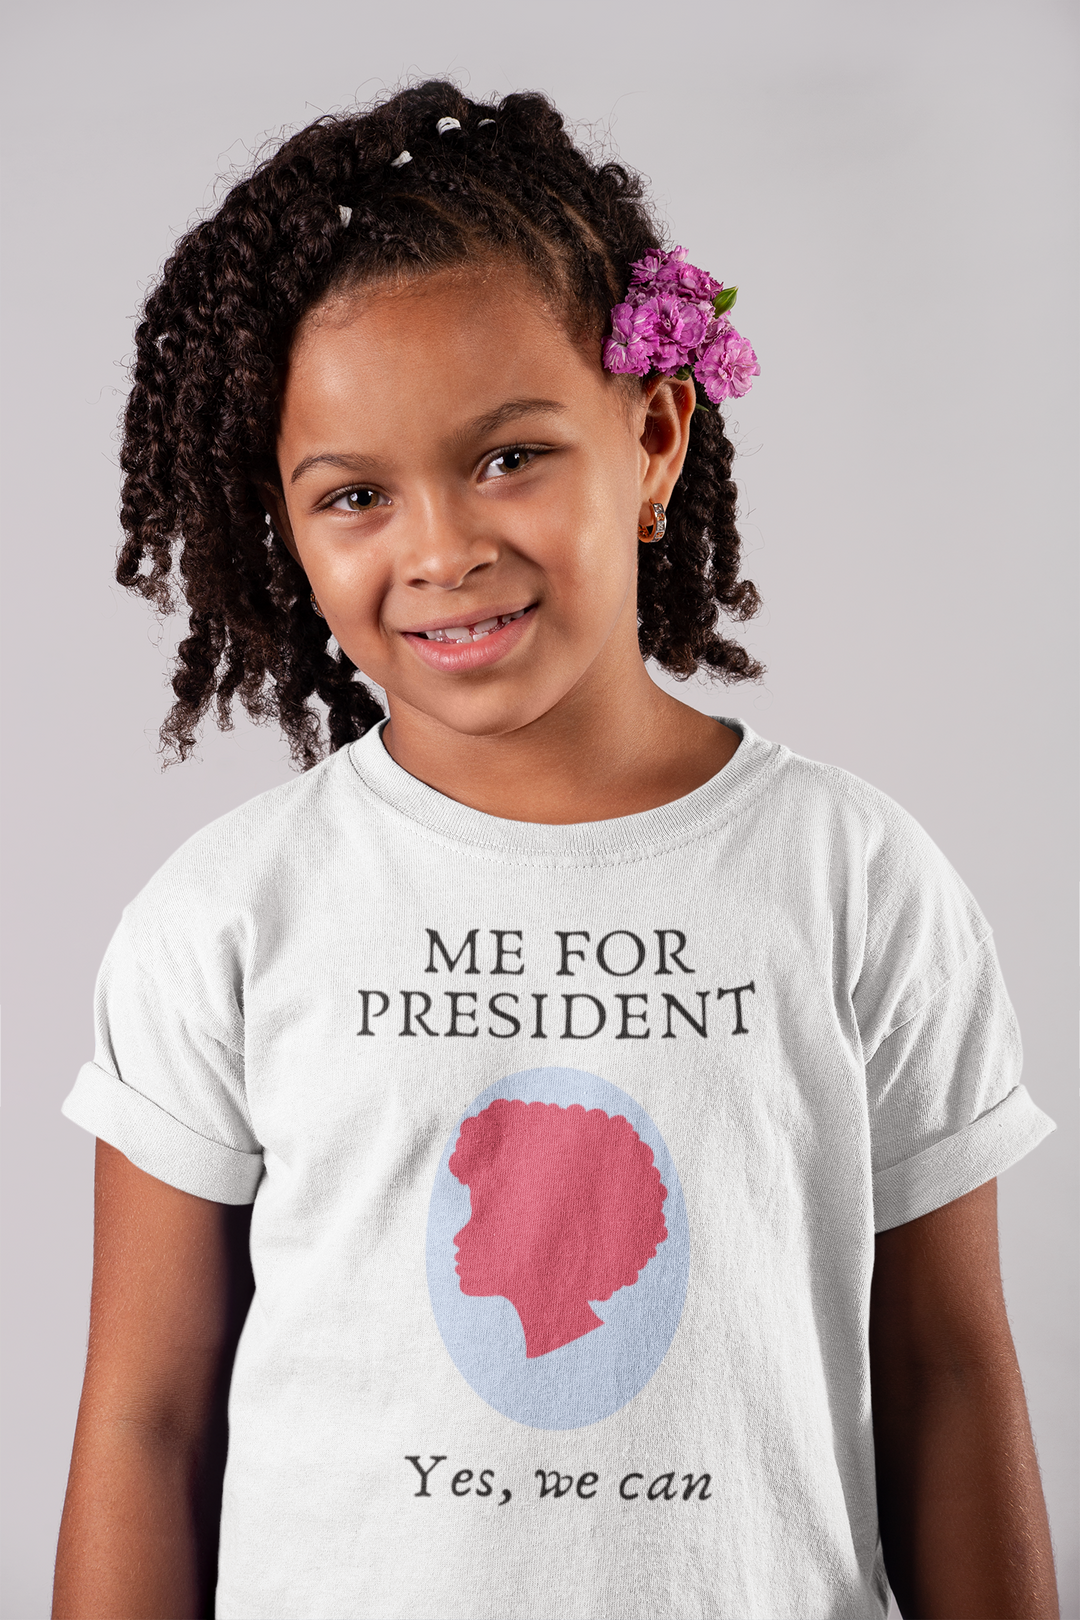 Me for president. Yes we can. Girl power t-shirts for Toddlers and Kids.